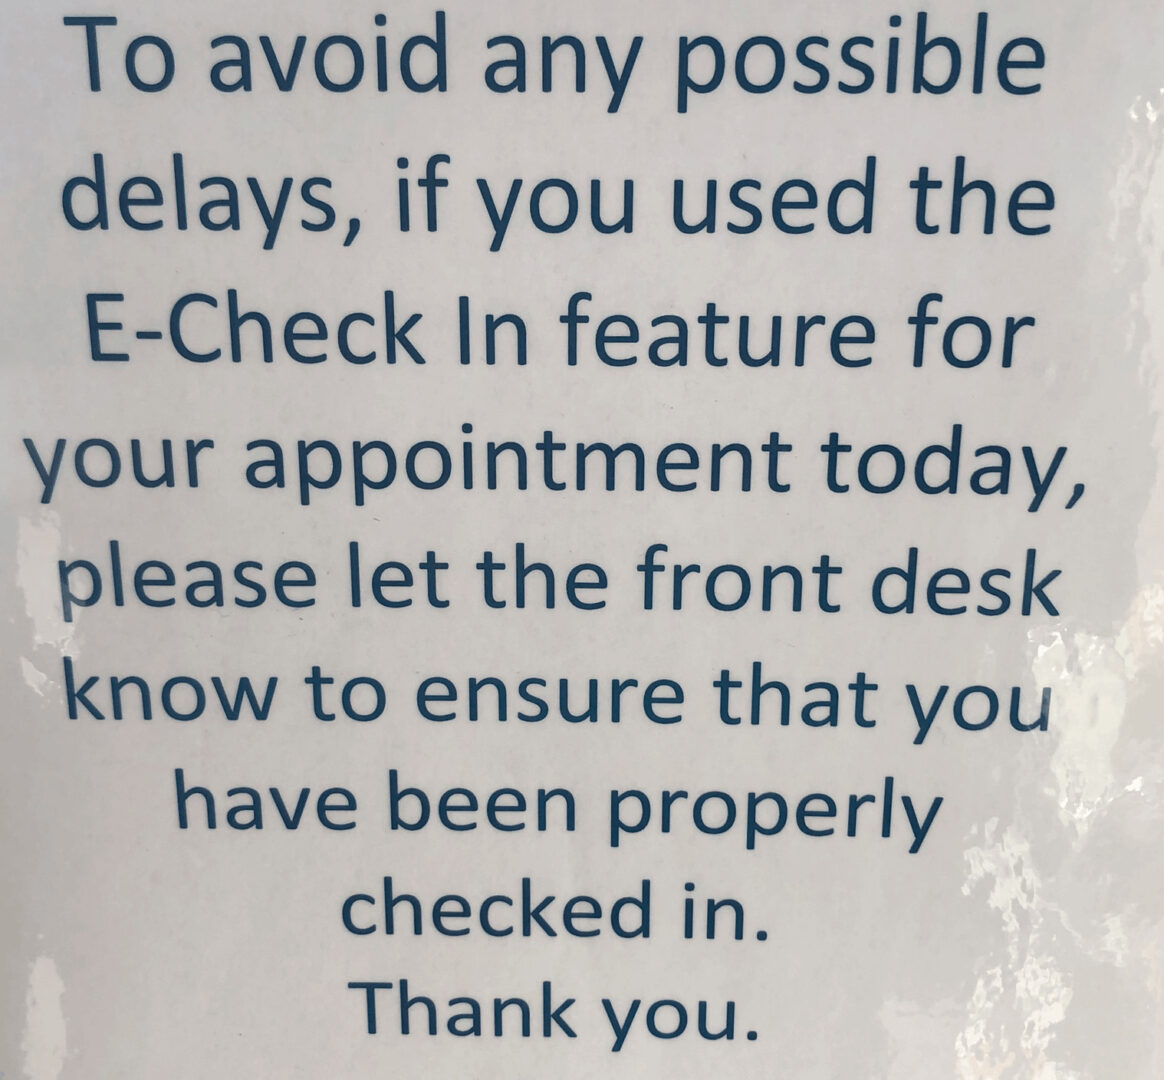 To avoid any possible delays, if you used the E-Check In feature for your appointment today, please let the front desk know to ensure that you have been properly check in. Thank you.